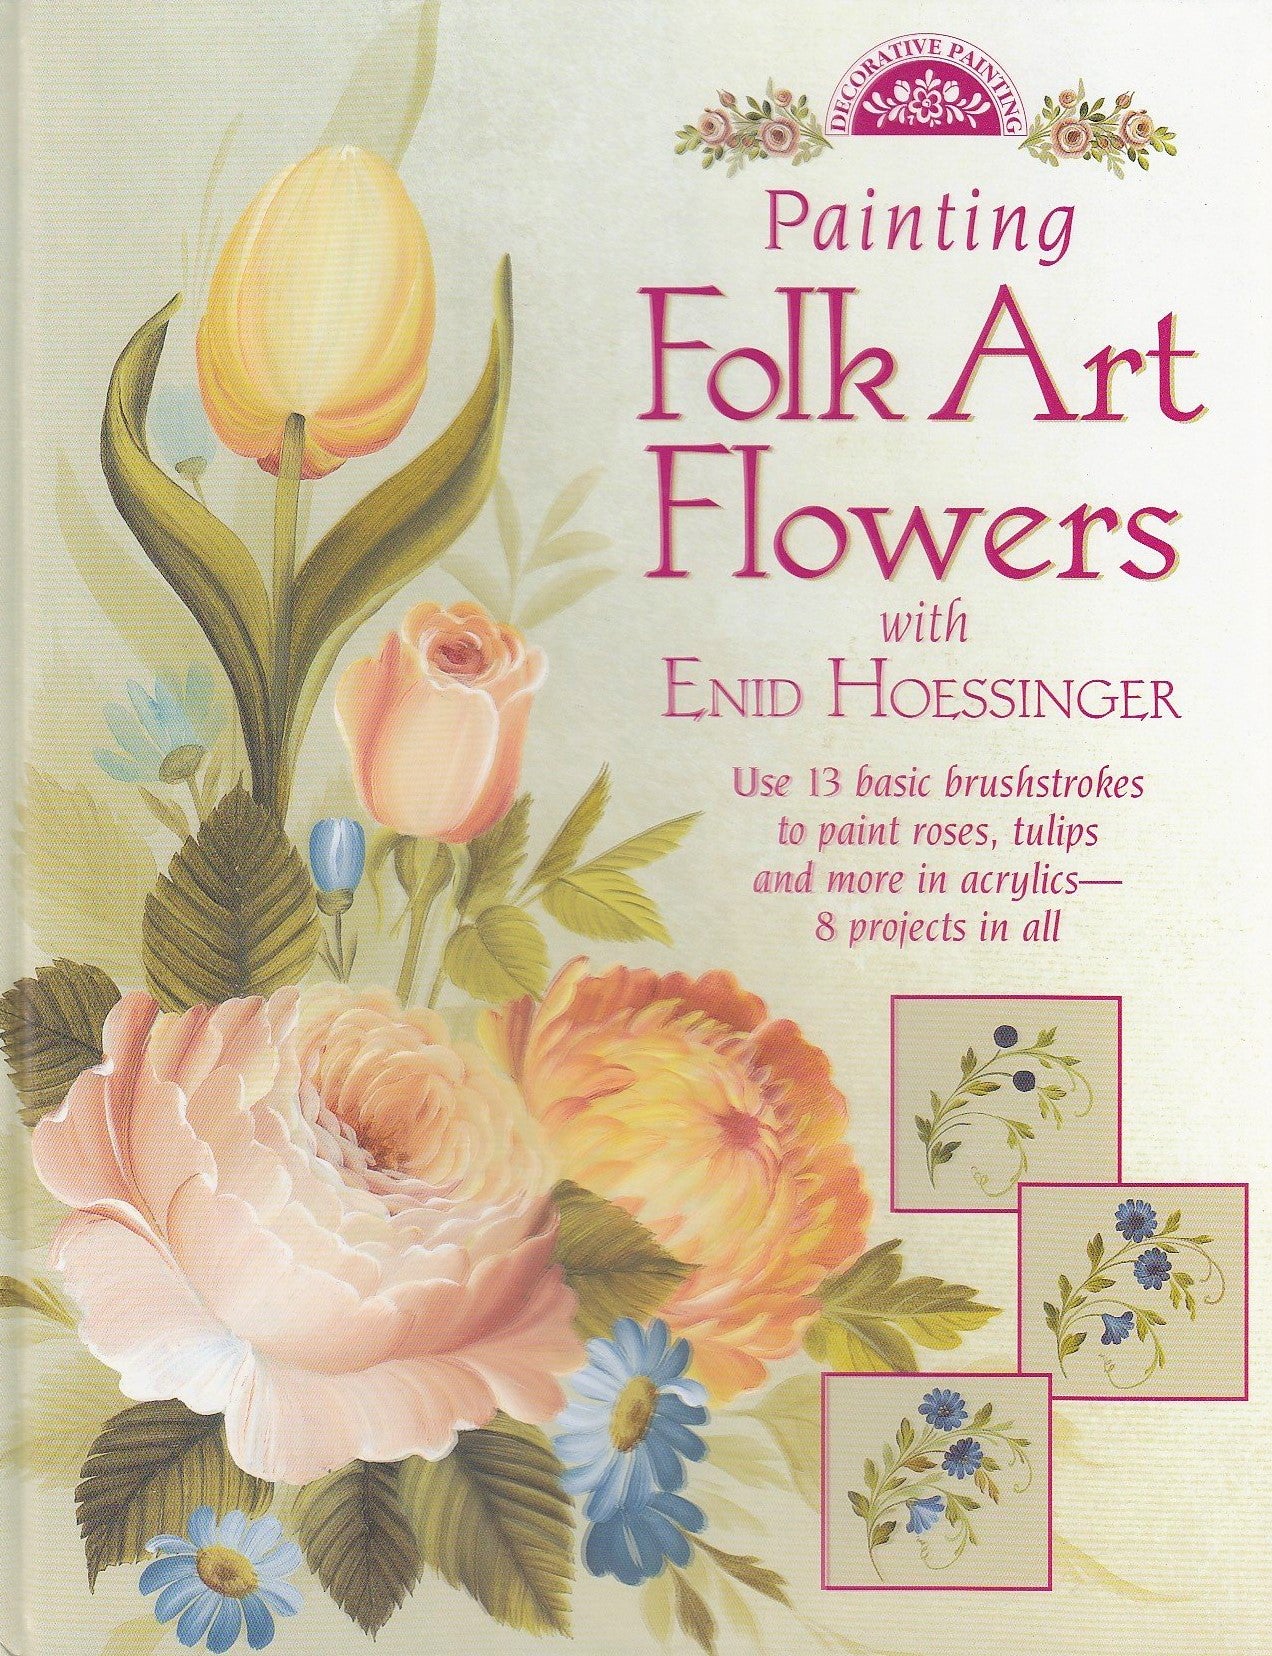 Painting Folk Art Flowers with Enid Hoessinger : Decorative Painting - Enid Hoessinger